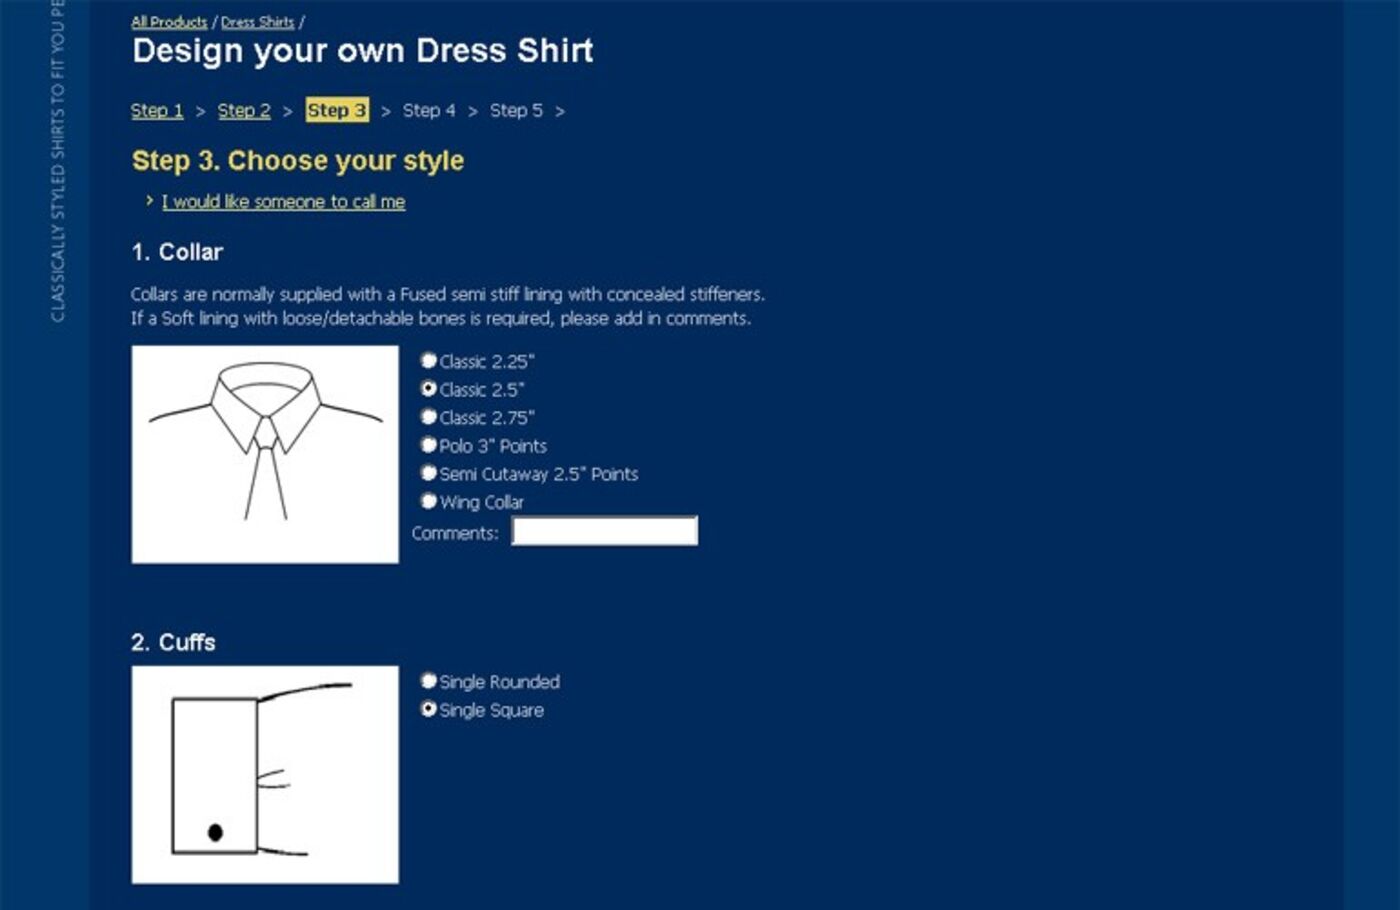 Shirts by Weisters Design Your Own Dress Shirt Step 3